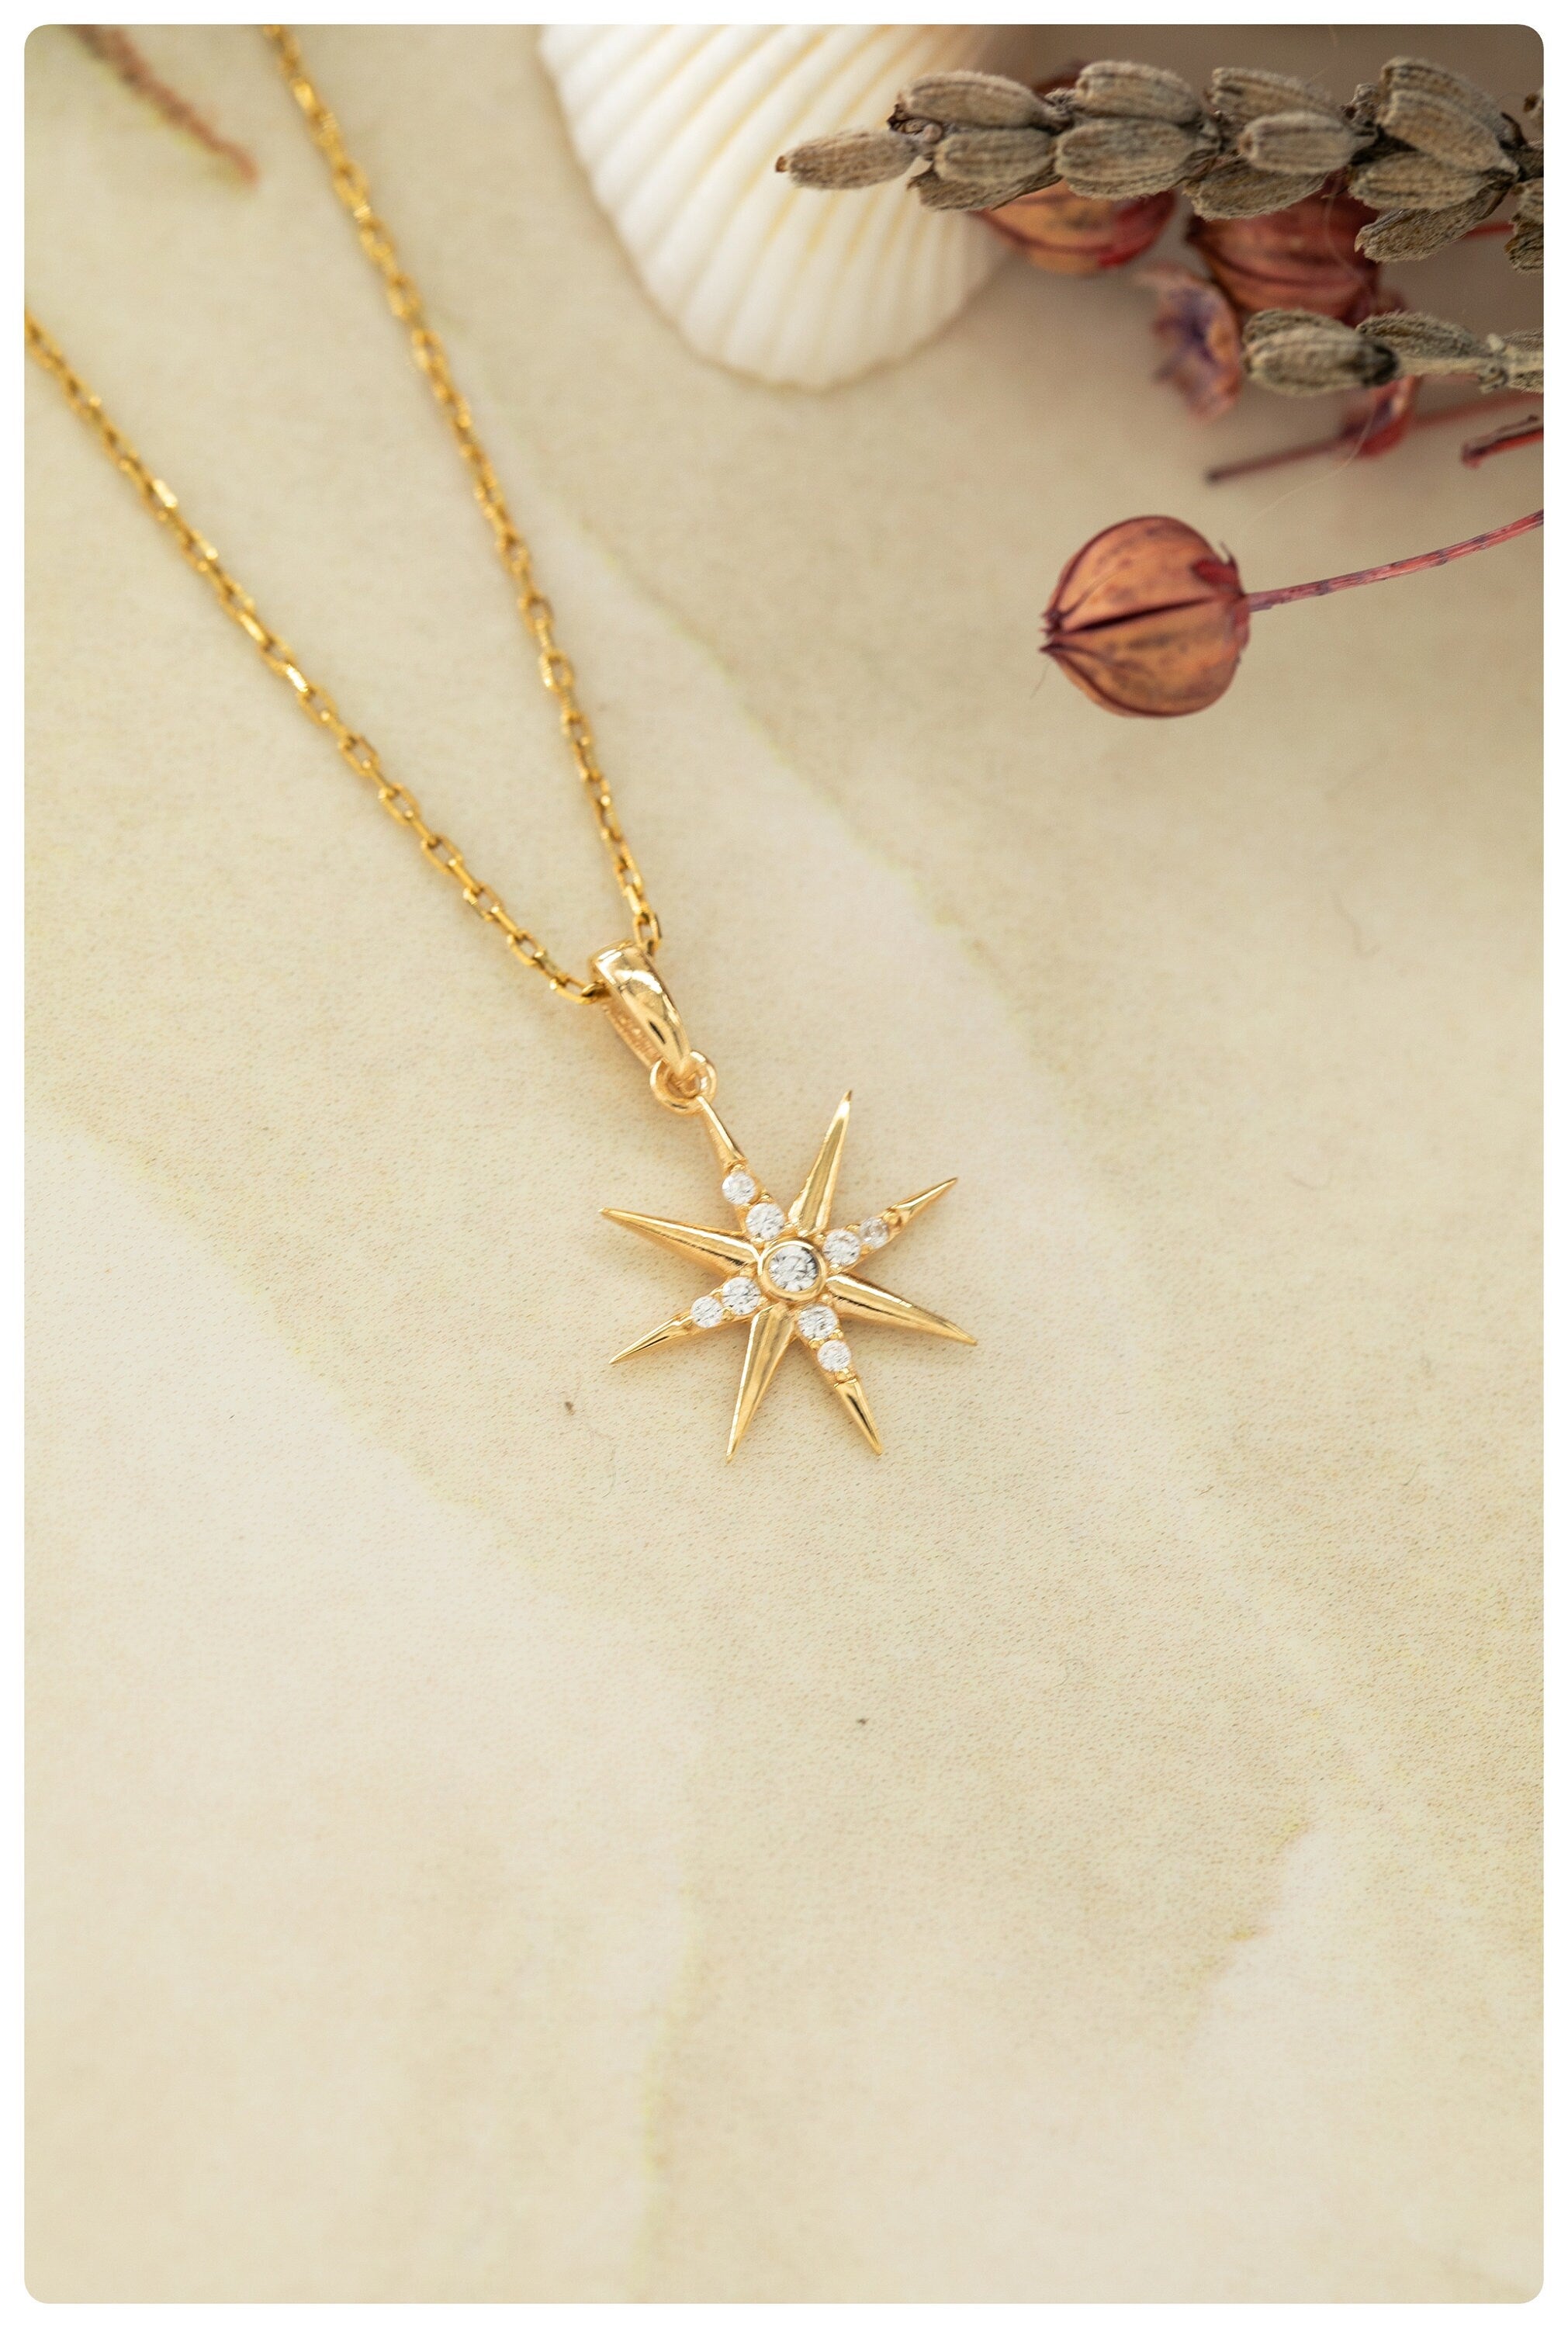 14k North Star Necklace Solid Gold Necklace Sterling Silver Mystical Celestial Pendant Mystical Star Jewelry Unique Anniversary Gift for Her